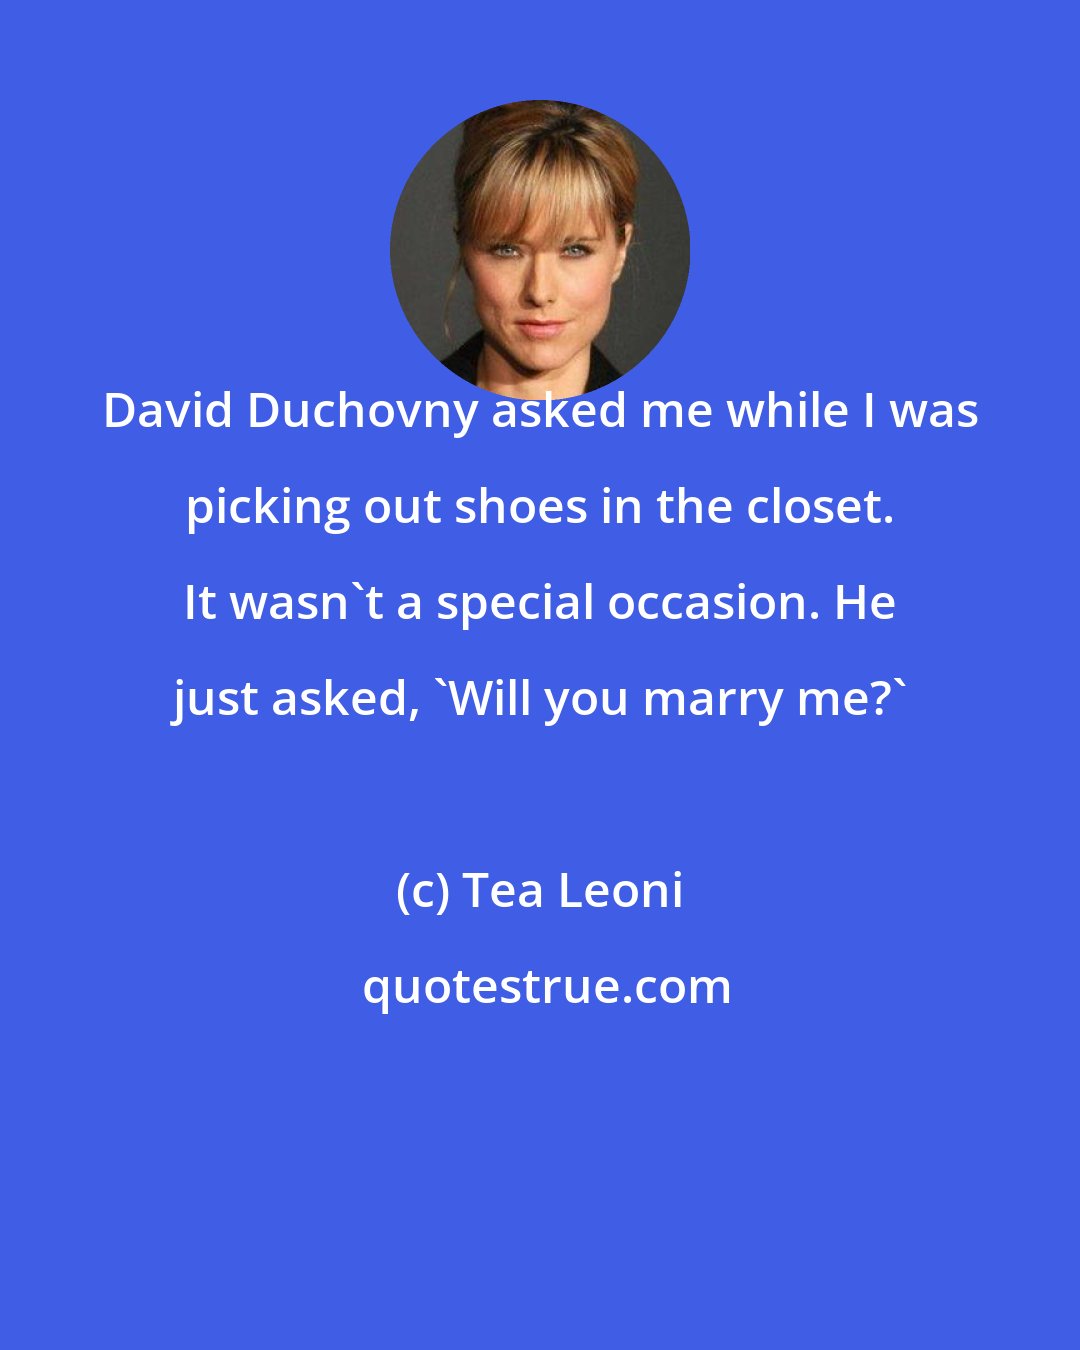 Tea Leoni: David Duchovny asked me while I was picking out shoes in the closet. It wasn't a special occasion. He just asked, 'Will you marry me?'